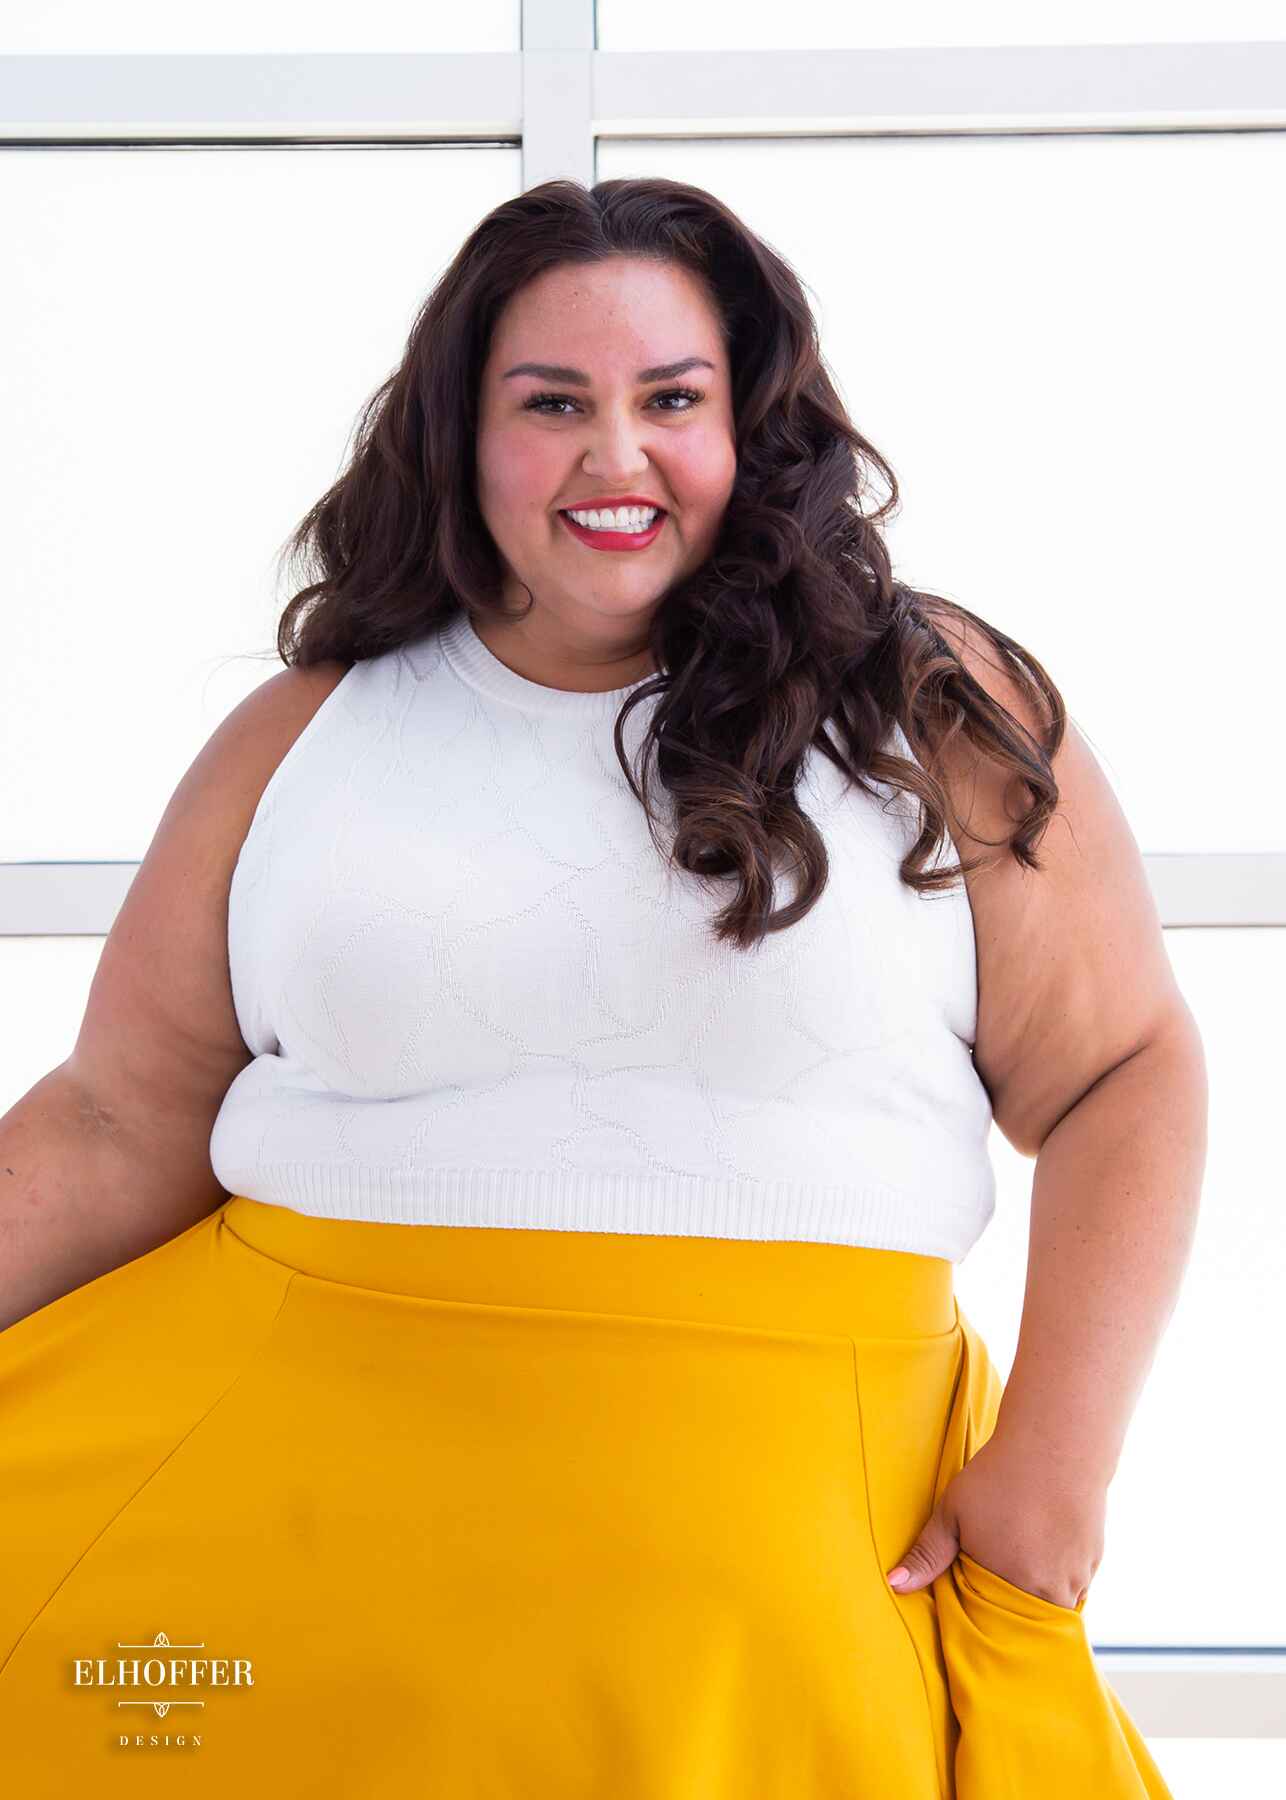 Kristen, an olive skinned 3xl model with long dark brown wavy hair, is smiling while wearing a bright white sleeveless knit crop top with a butterfly wing textured pattern. She paired the crop top with a golden yellow knee length high low skirt.